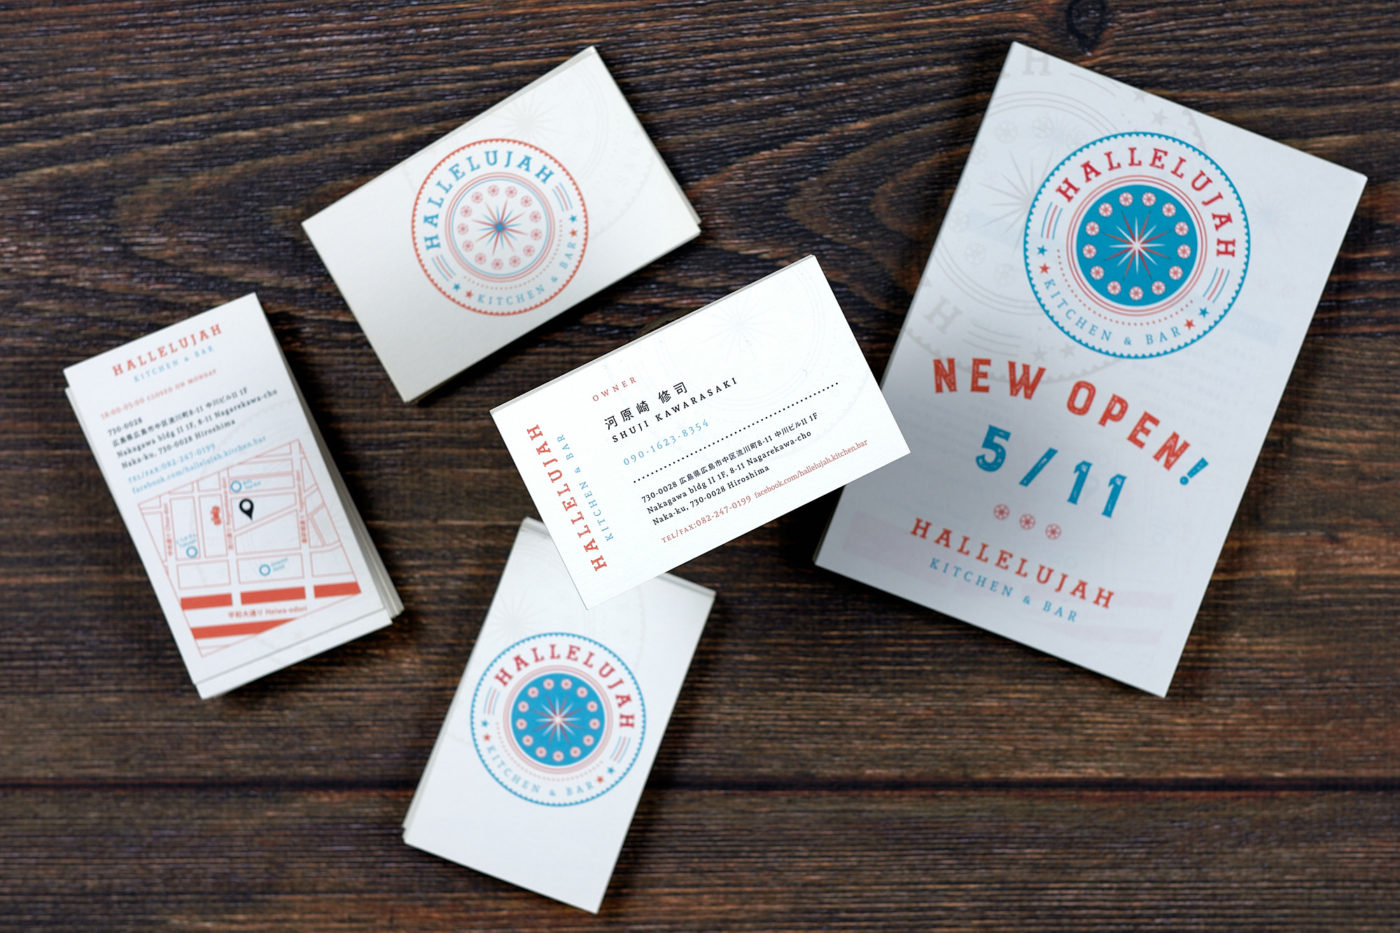 Restaurant and bar business cards